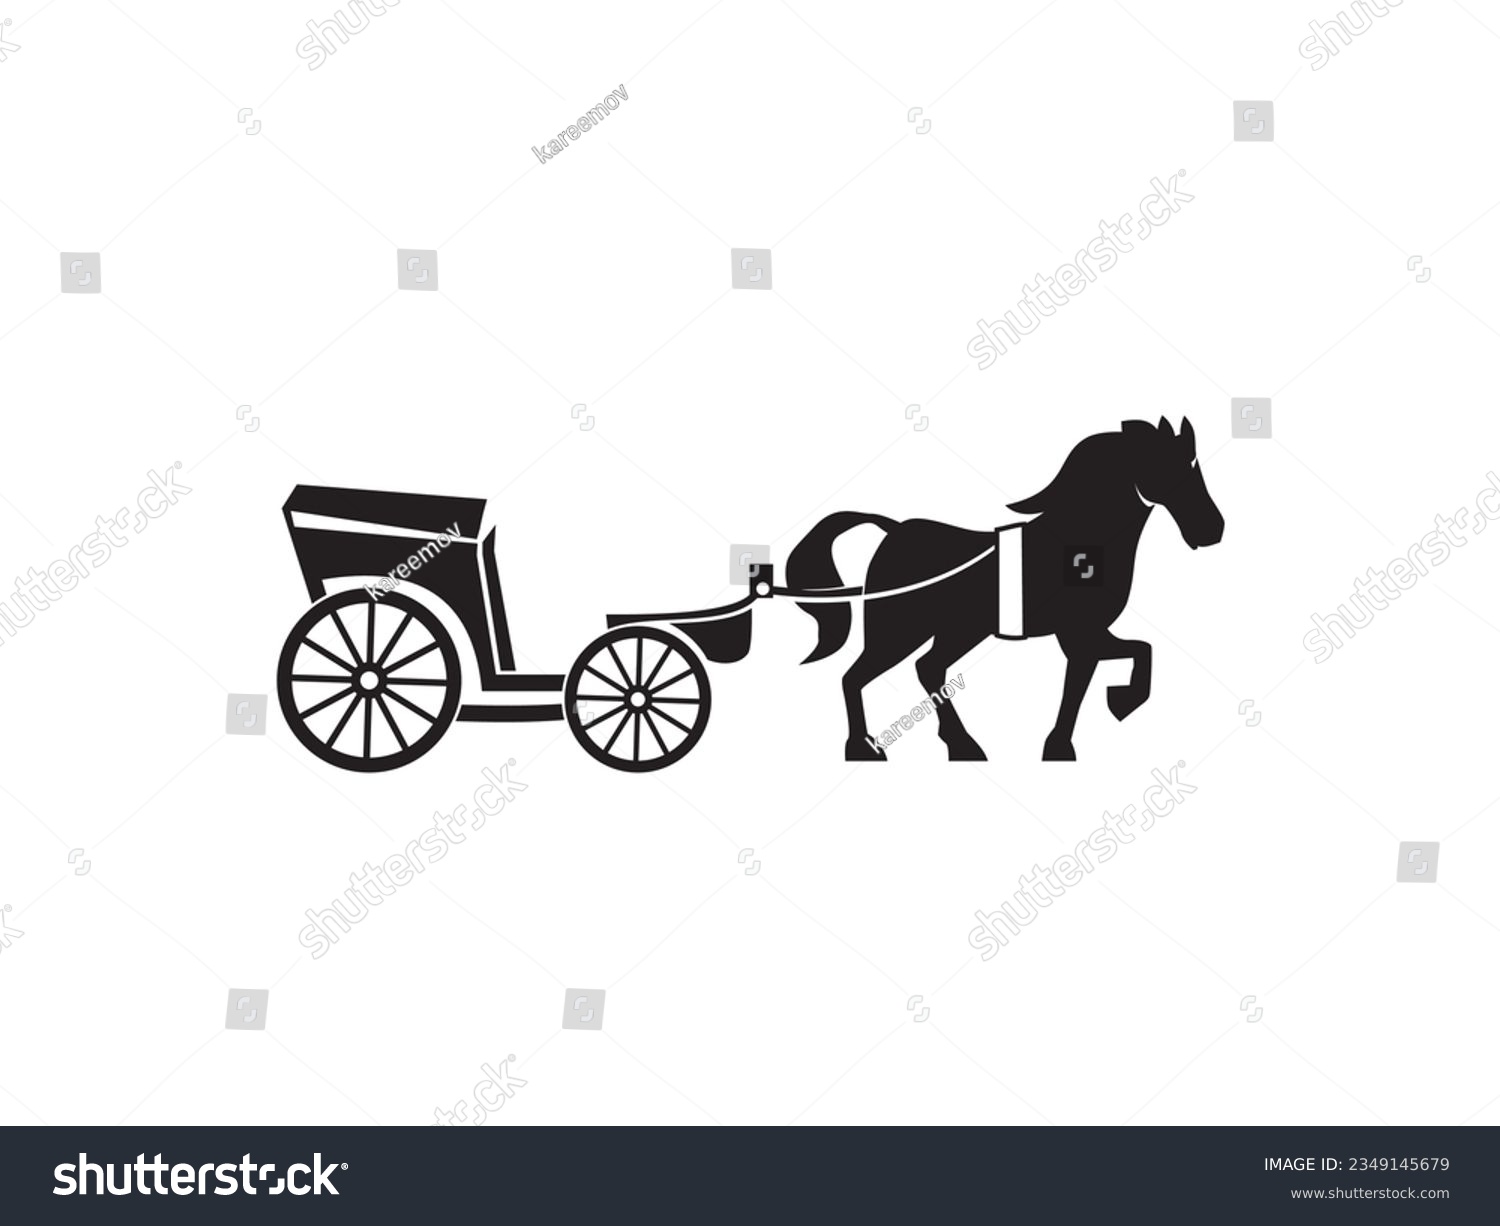 SVG of horse-drawn carriage icon vector, useful for brand and logo designs svg